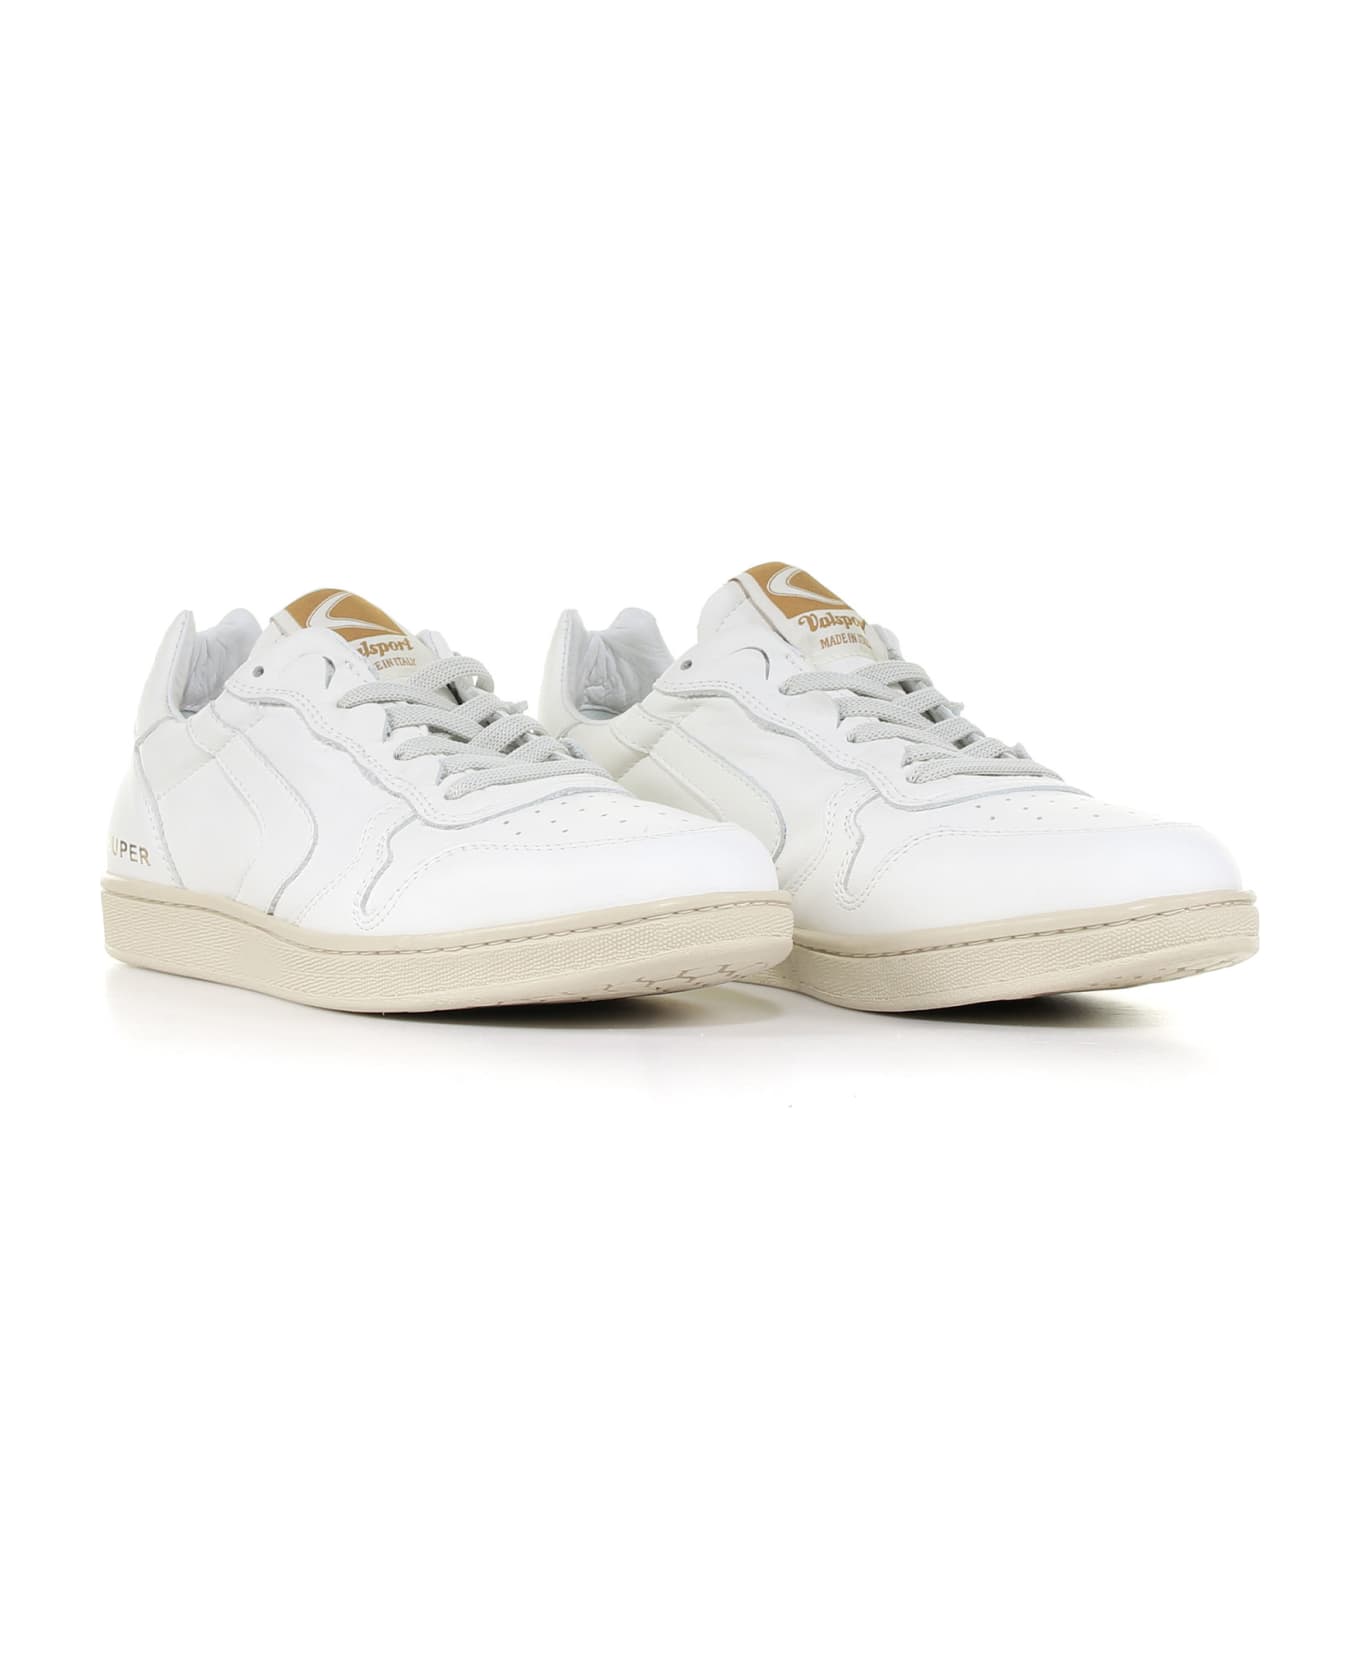 Valsport Super Sneaker In Suede And Mesh - BIANCO BIANCO